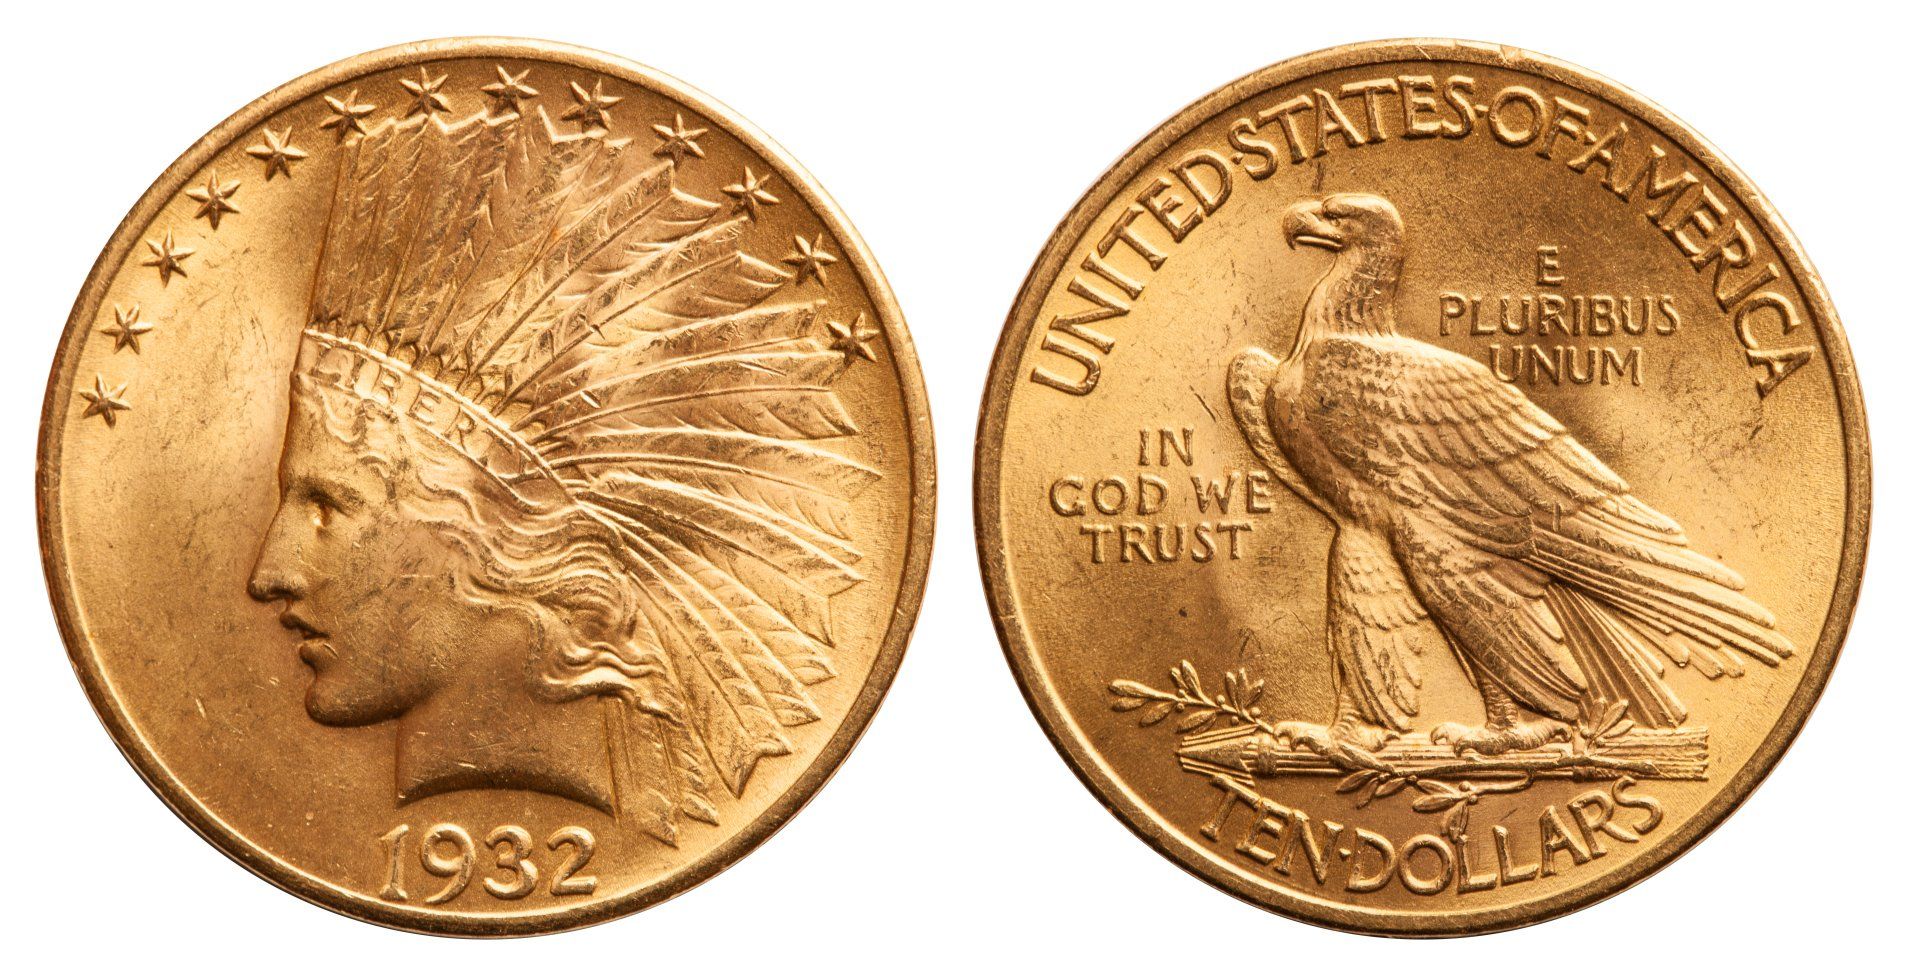 1932 Indian Head Gold Eagle Coin